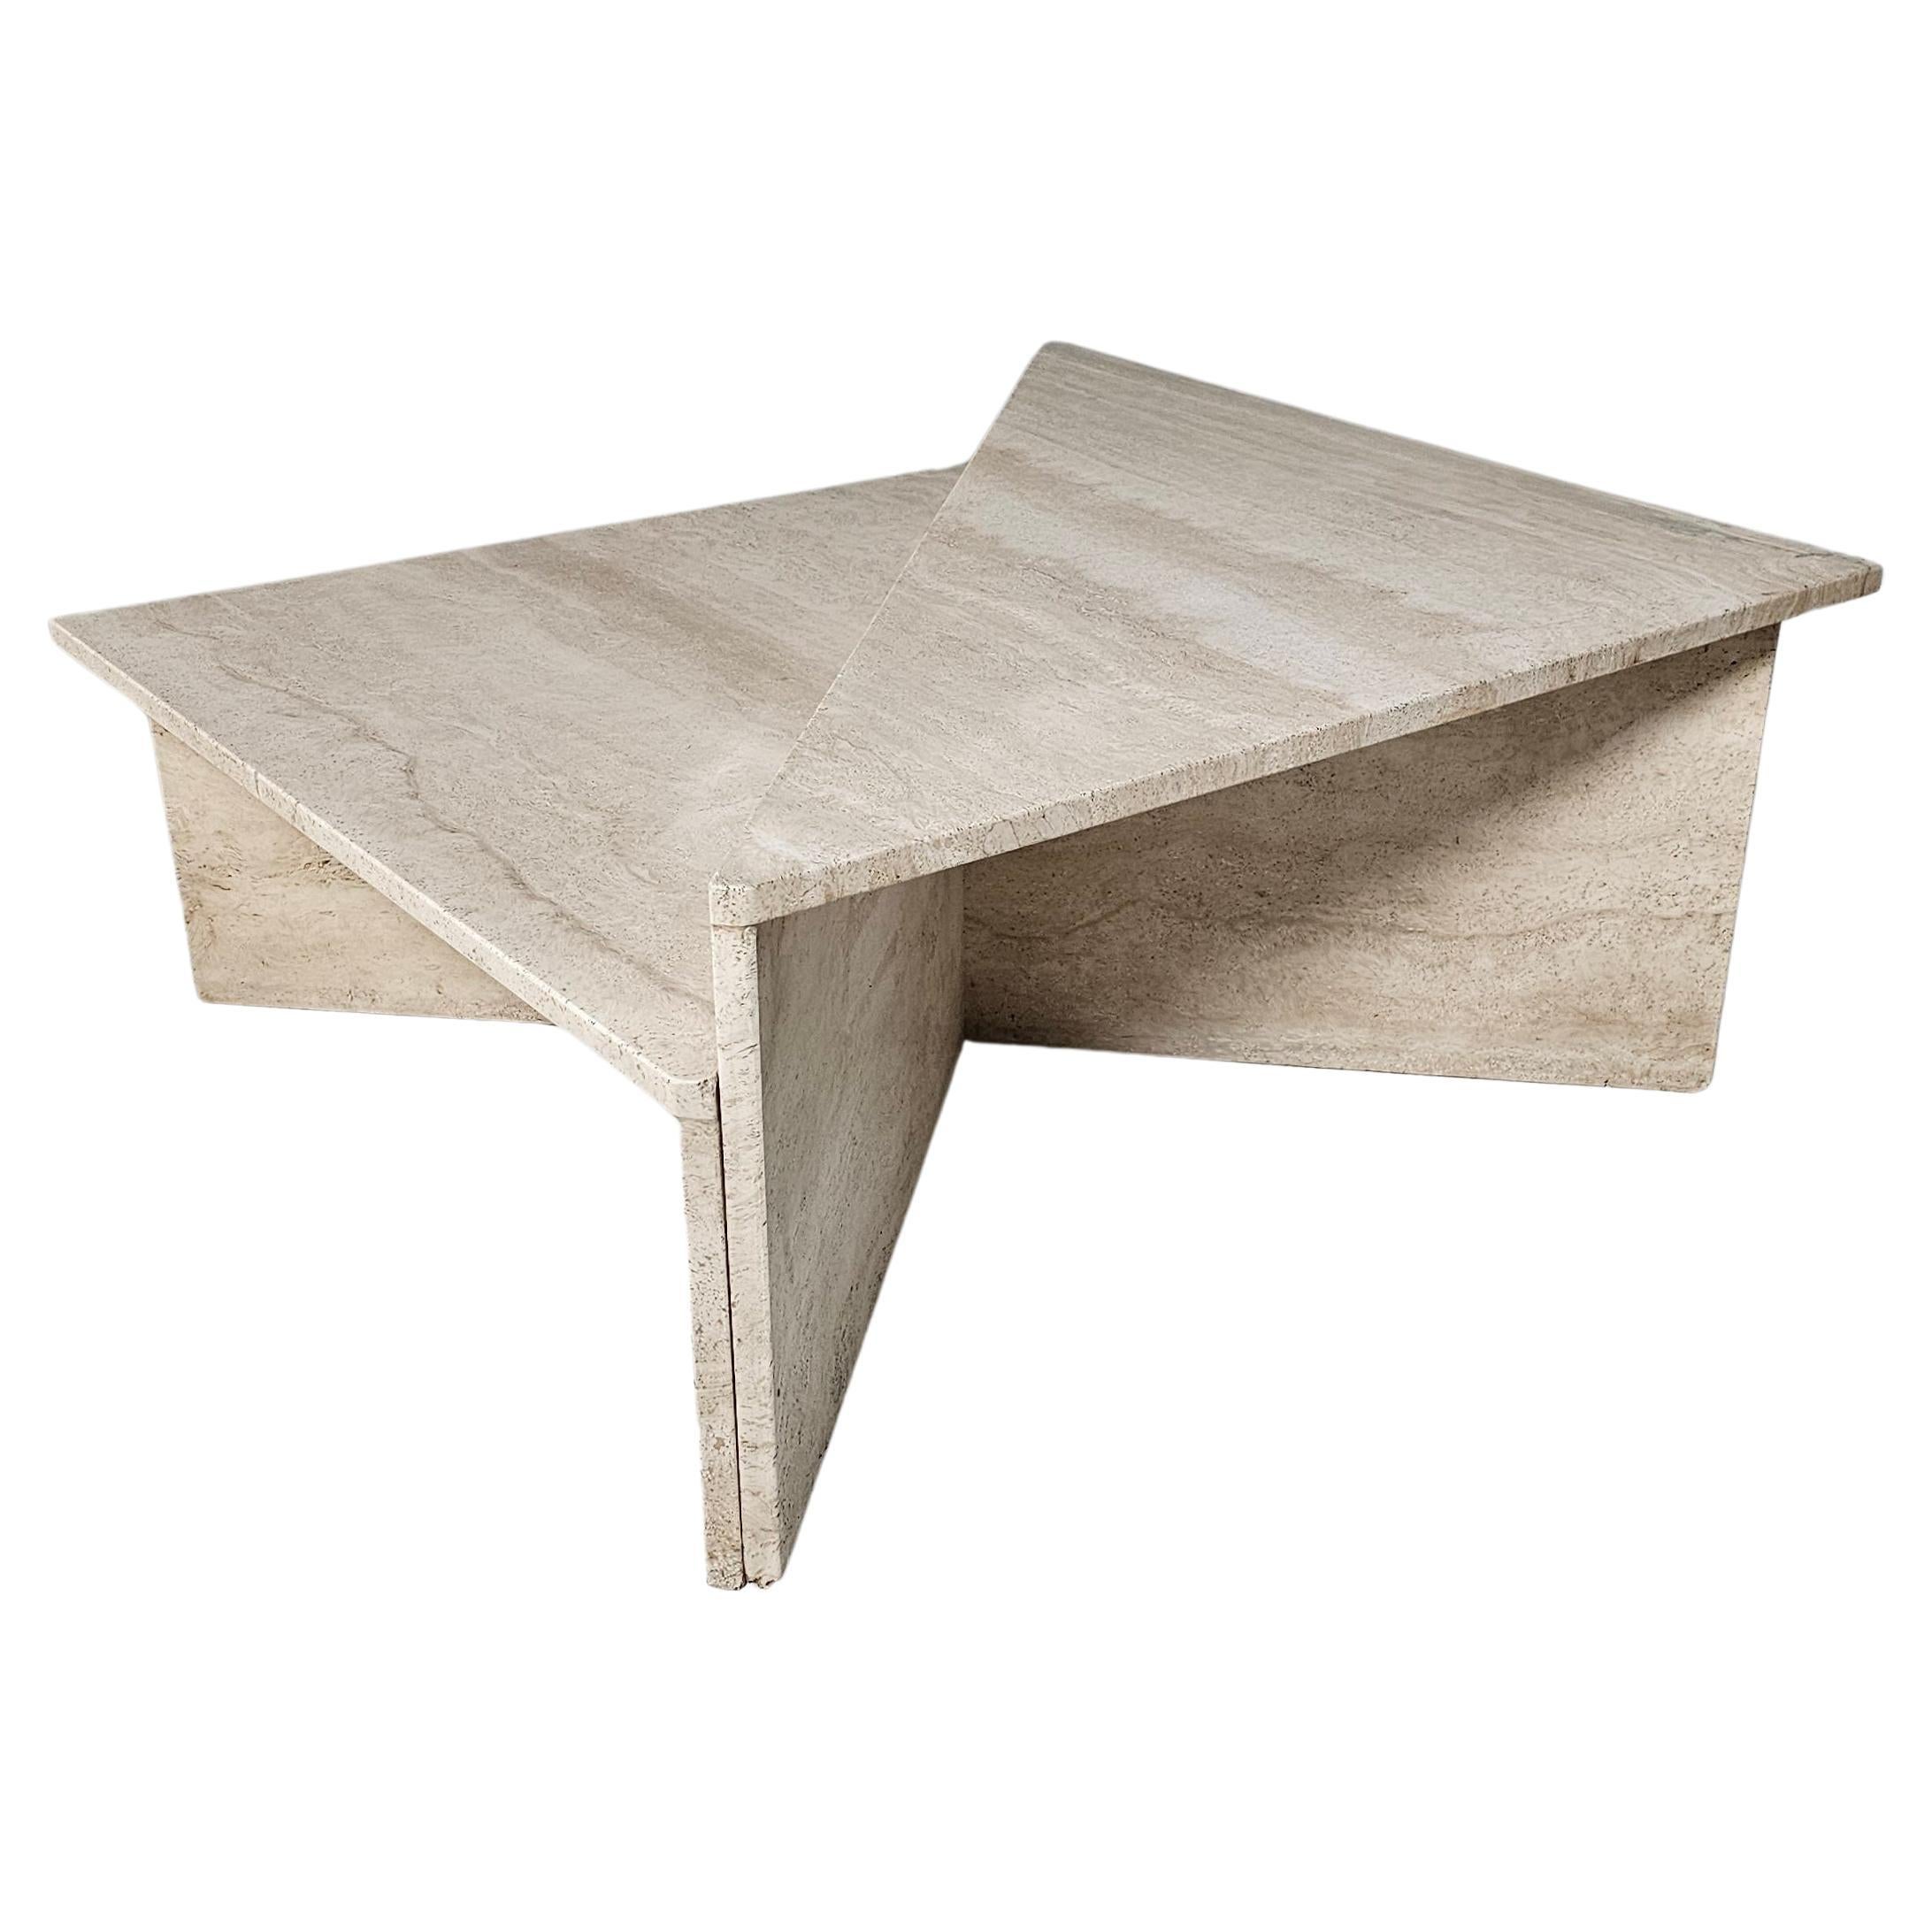 Two Part Travertine Modular Coffee Table by Up & Up, circa 1970s